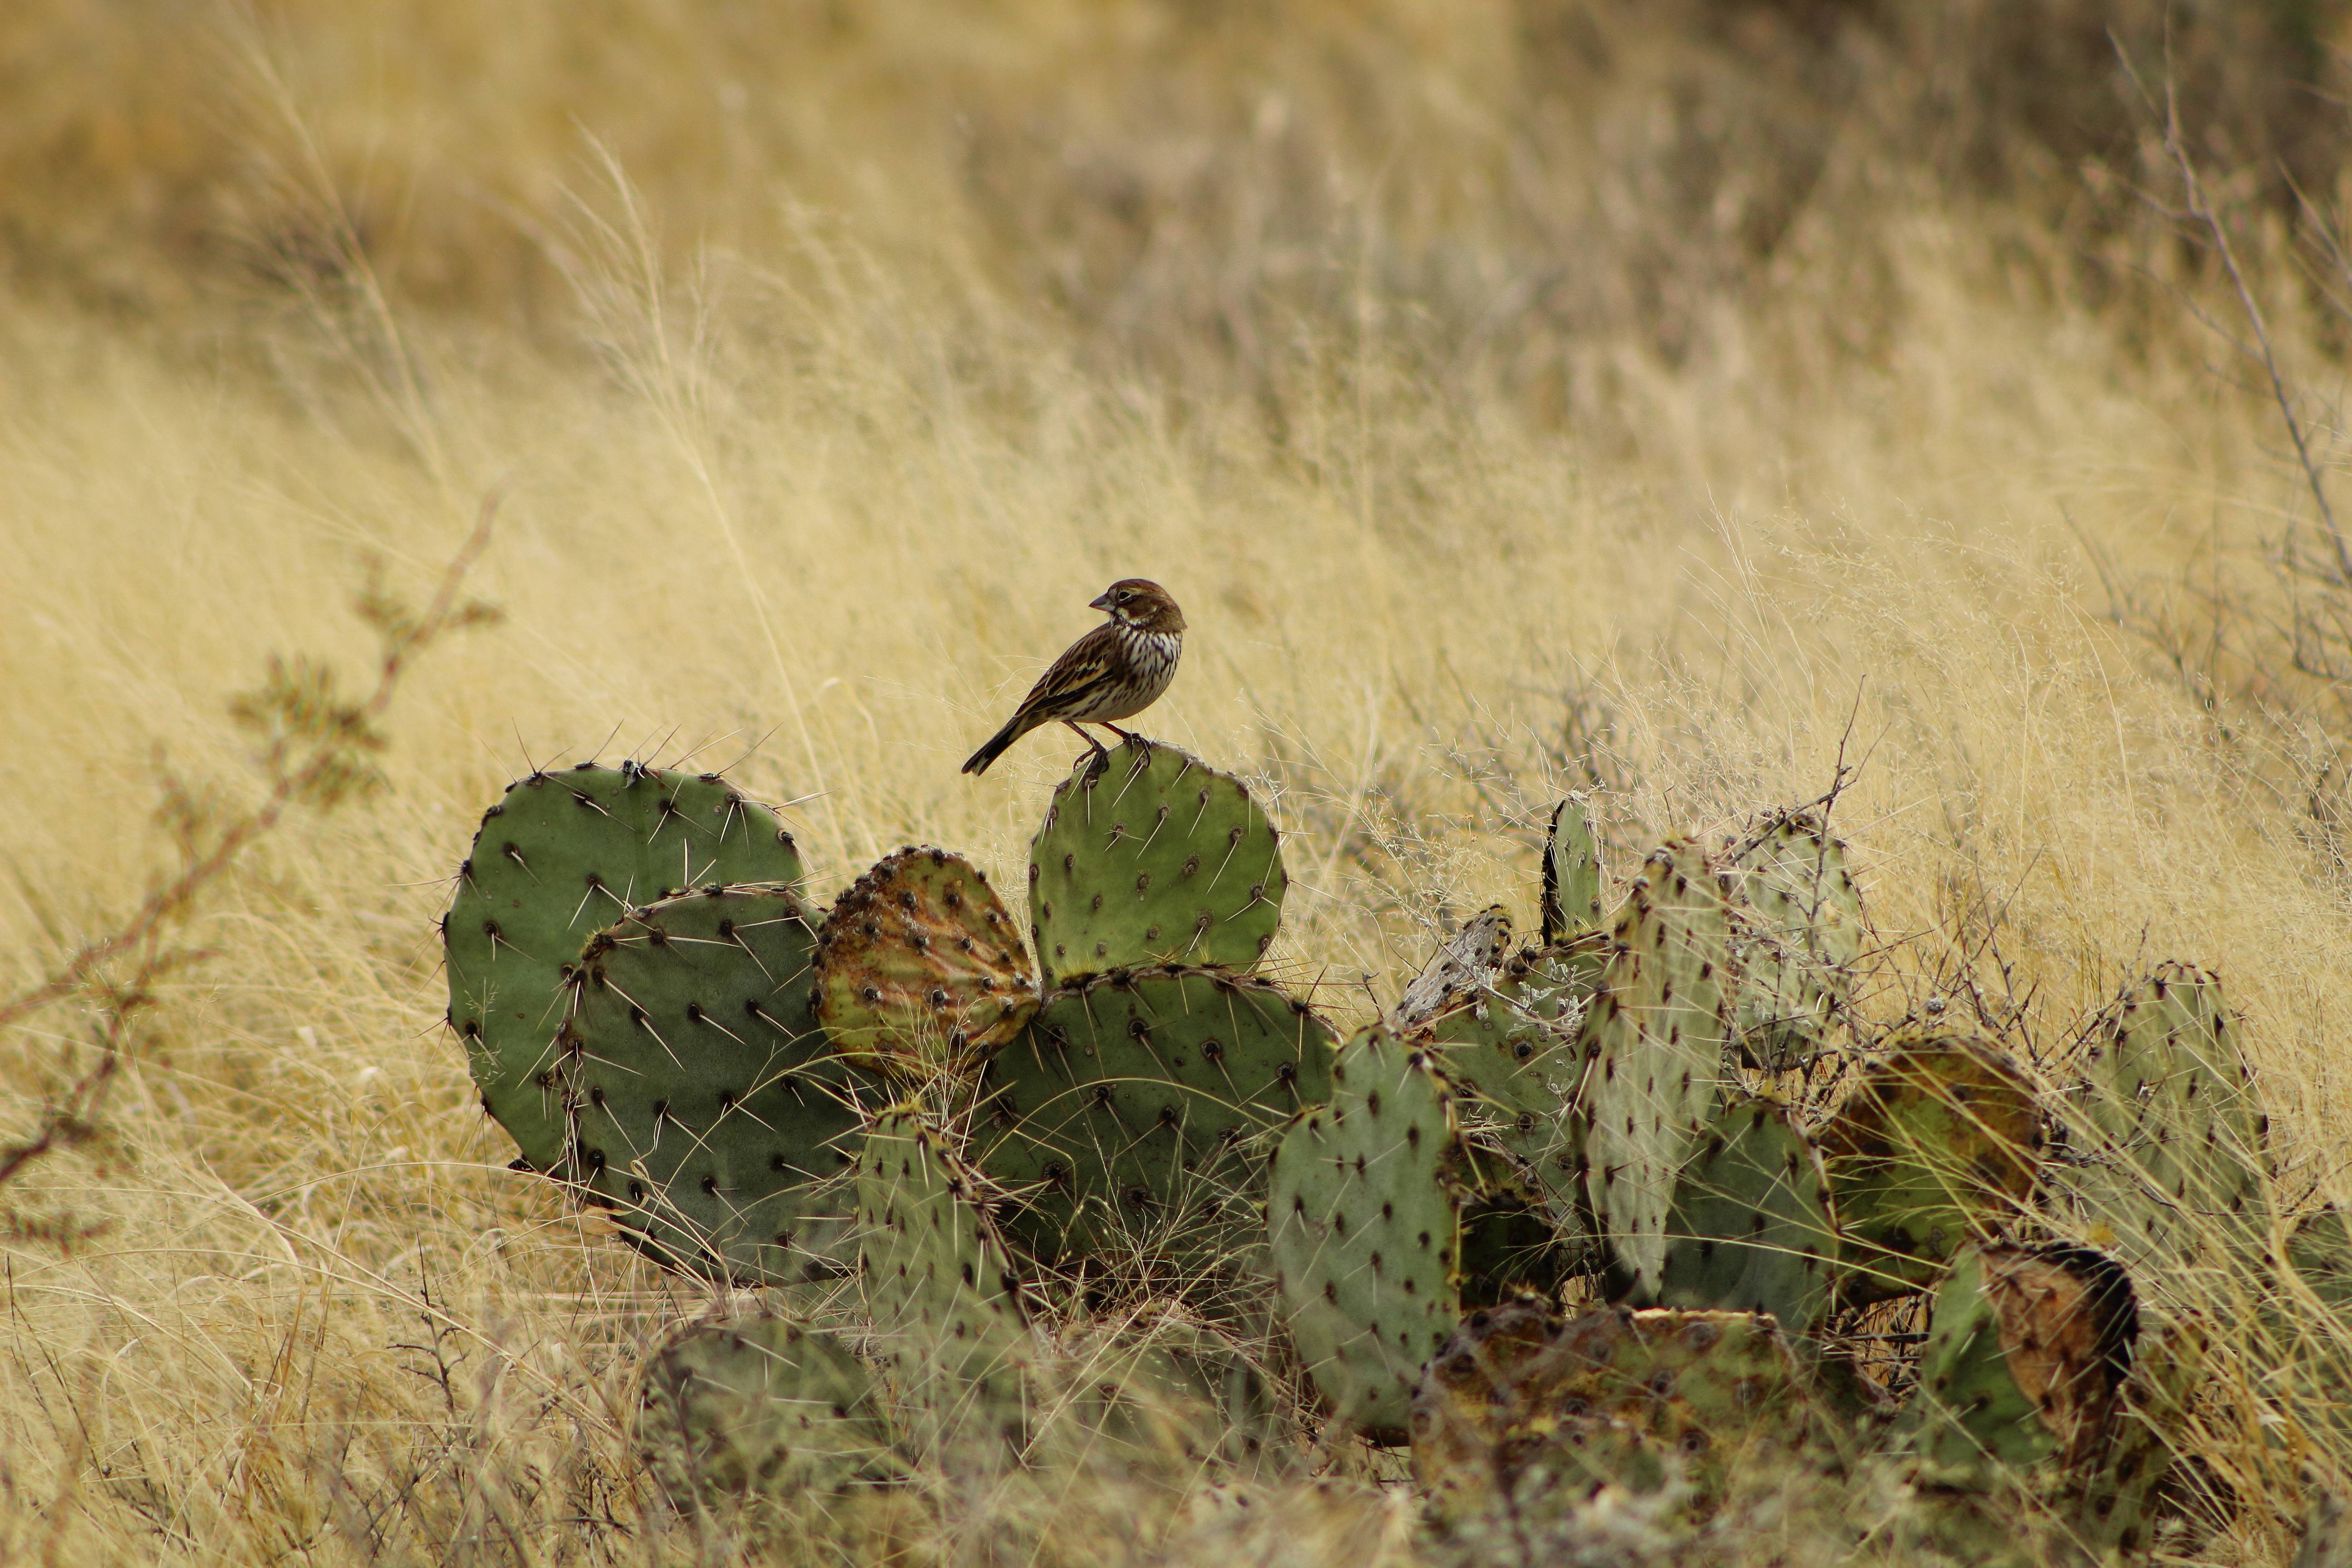 Photo by Patrick Macaulay  |  A small bird perched on a prickly pear cactus.